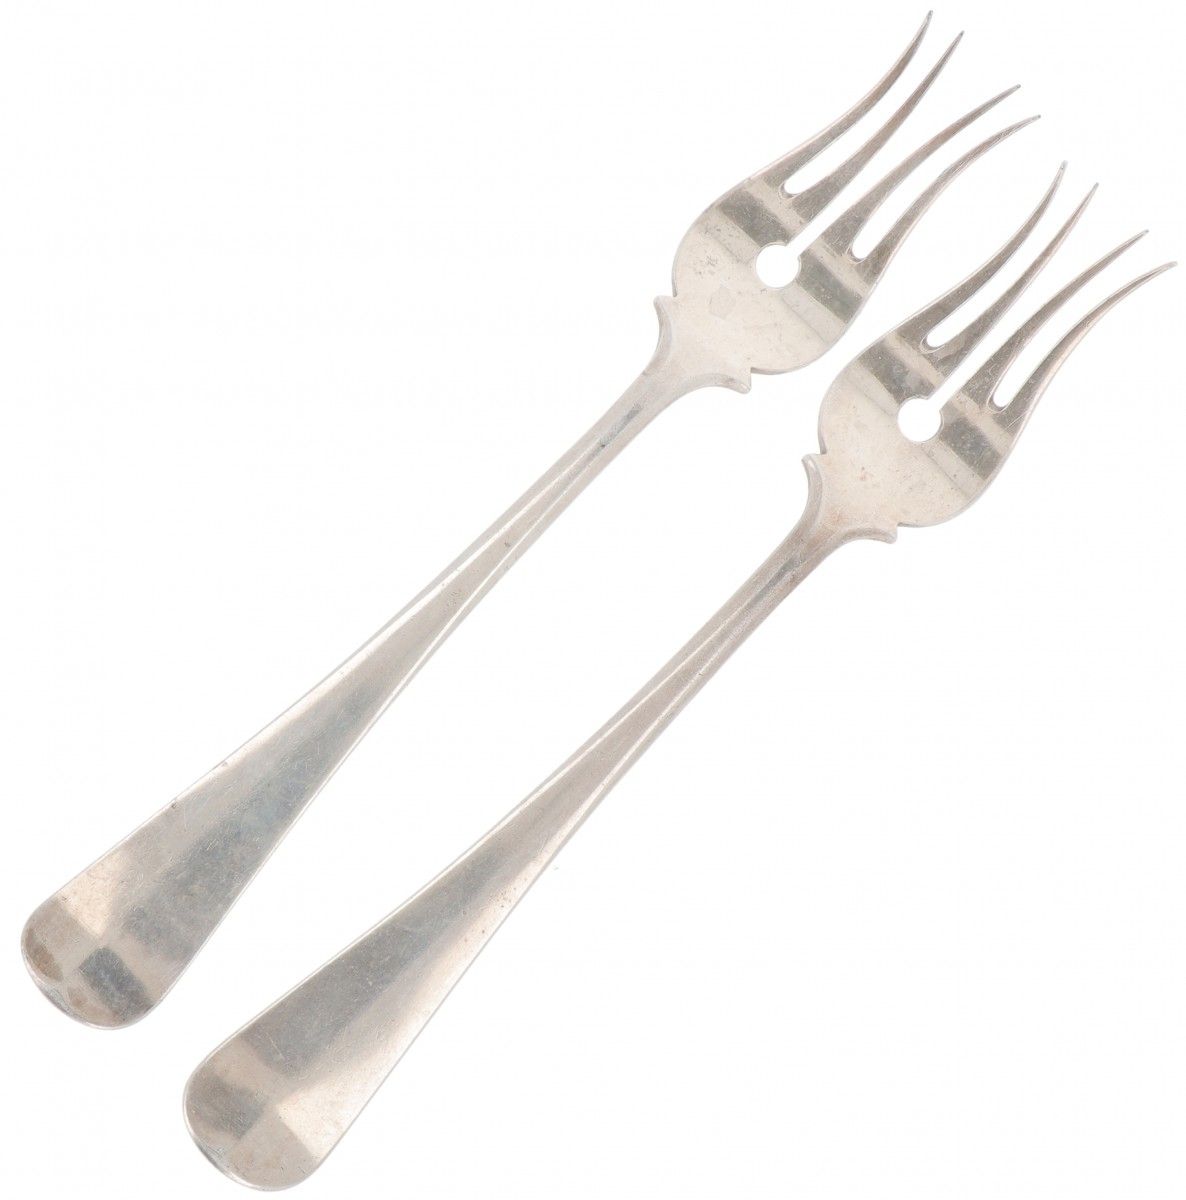 (2) piece set of cold meat forks "Haags Lofje" silver. "Haags Lofje". Pays-Bas, &hellip;